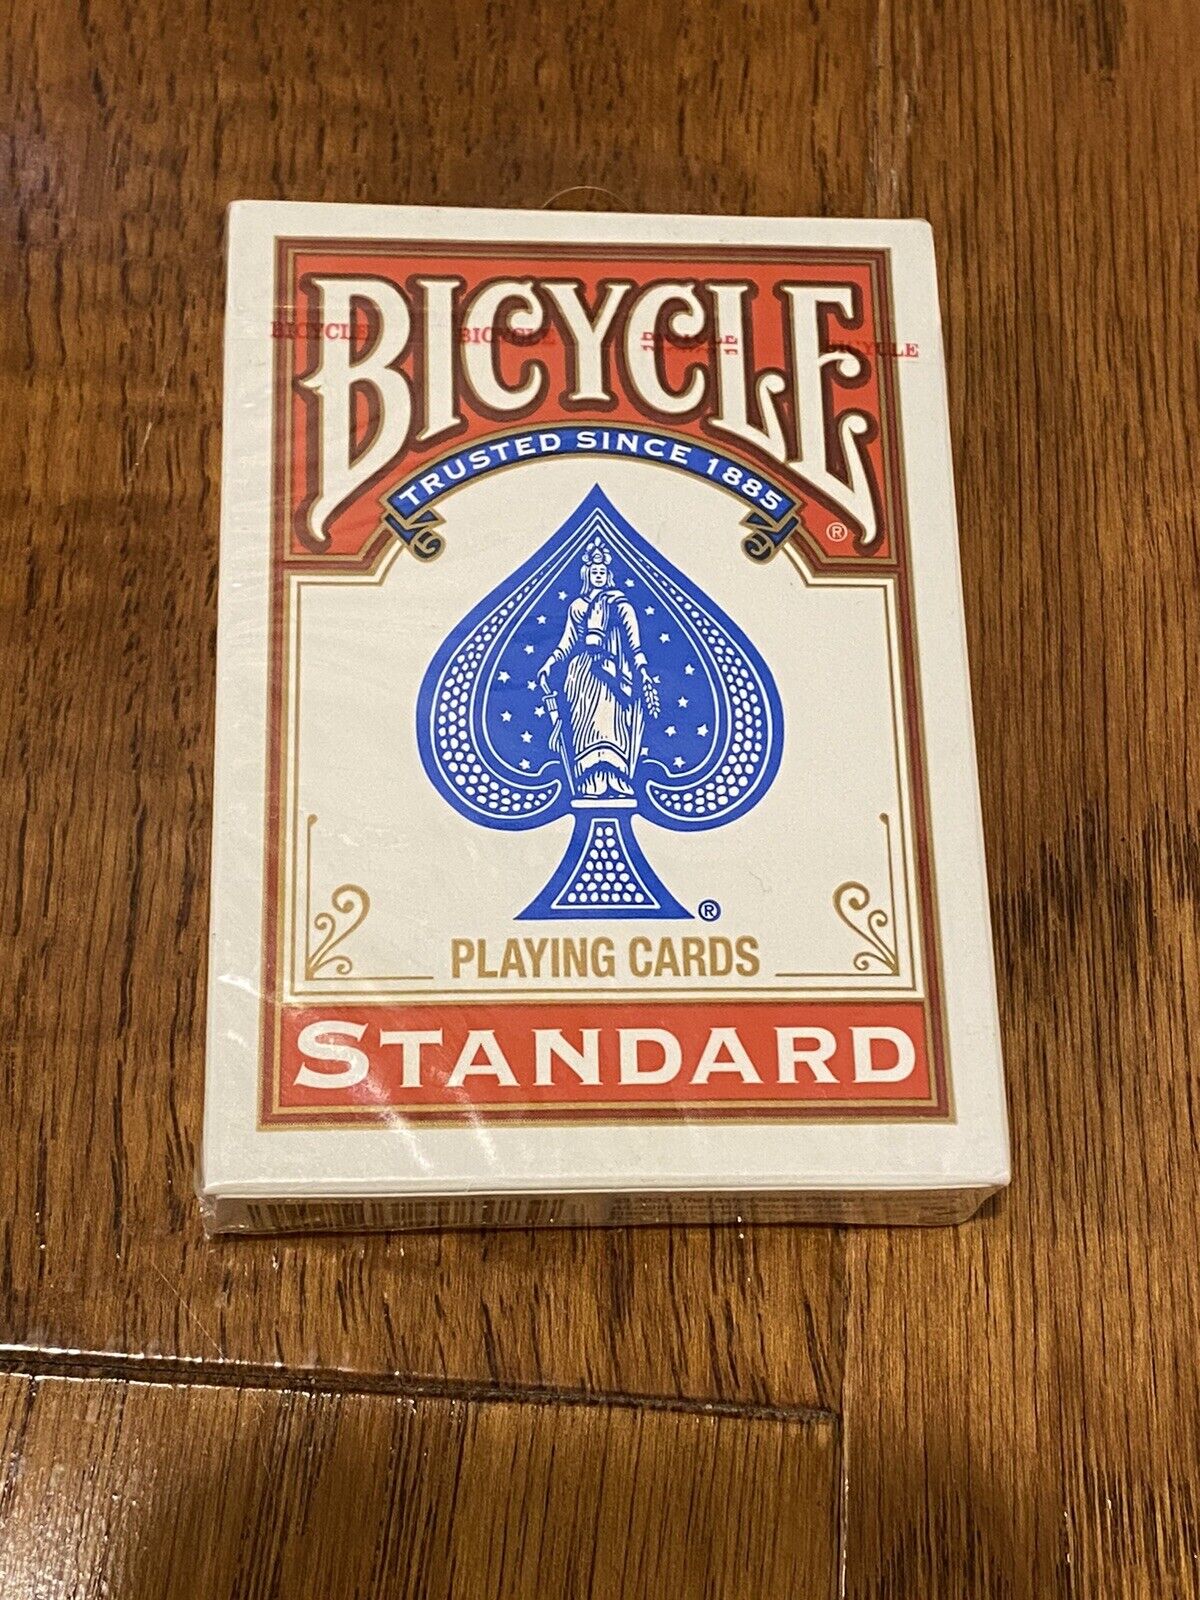 Bicycle Standard Poker Playing Cards